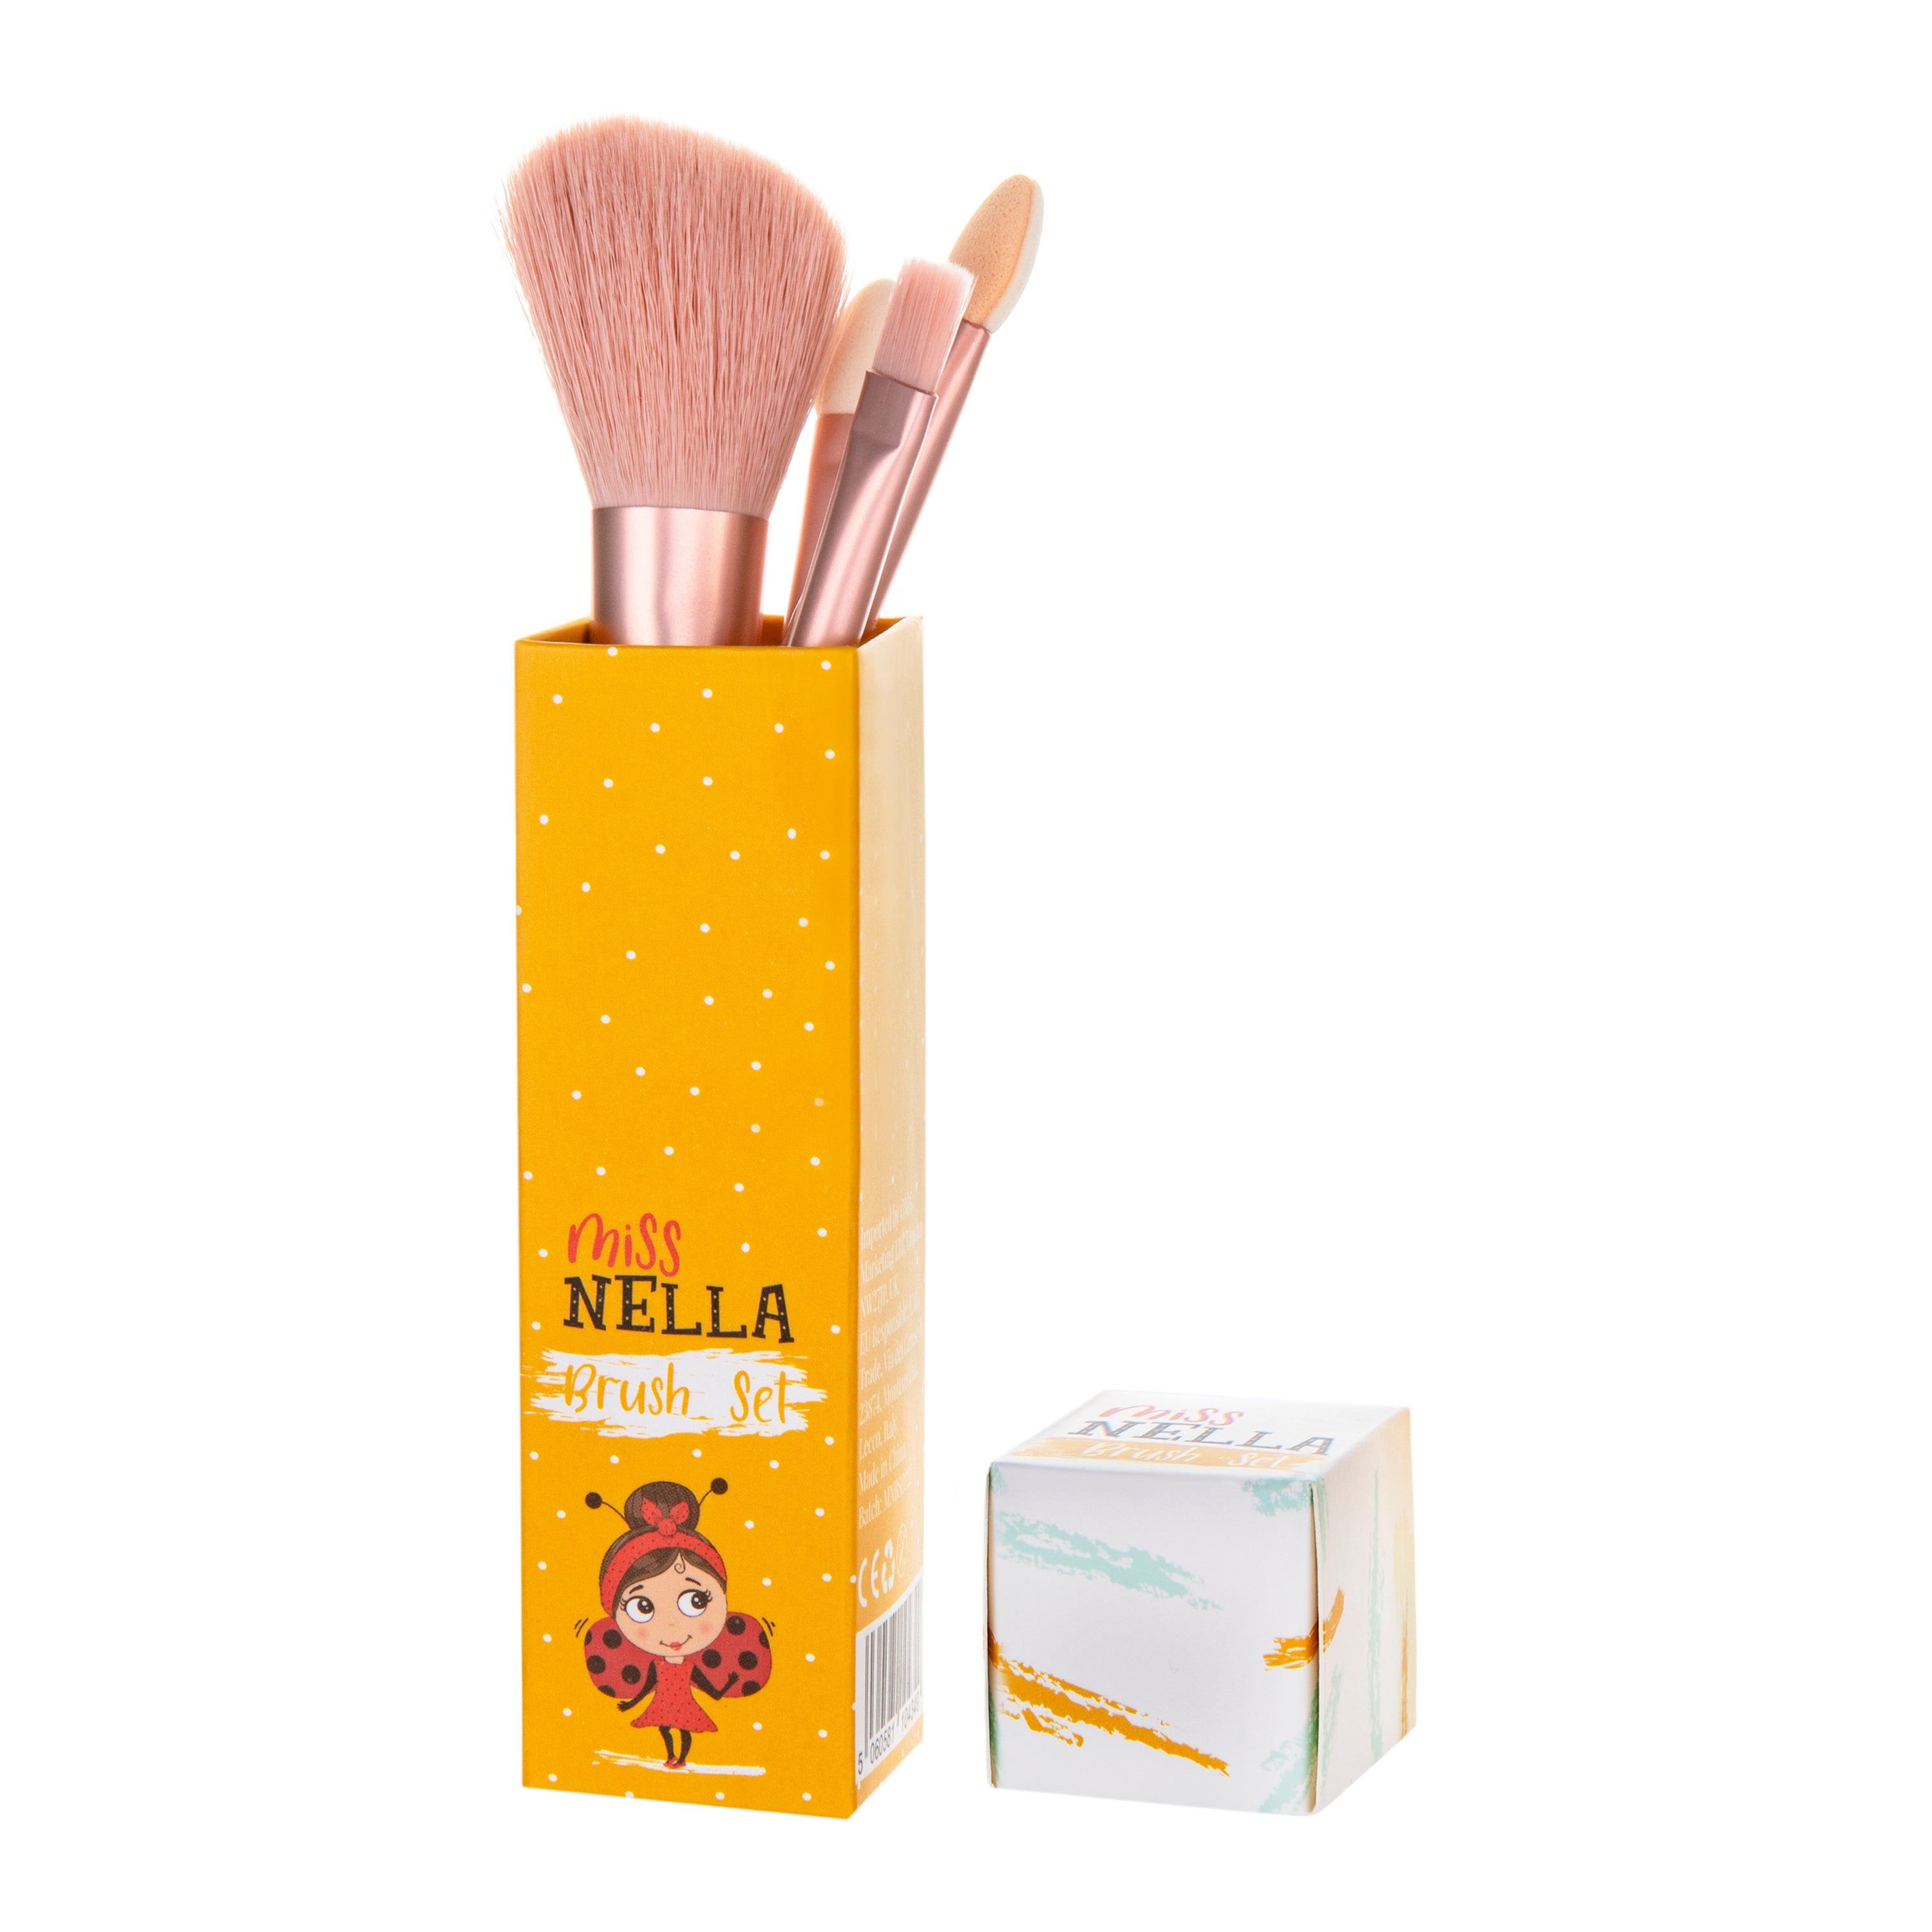 Get Creative: Miss Nella's Kids' All You Need Makeup Brush Set